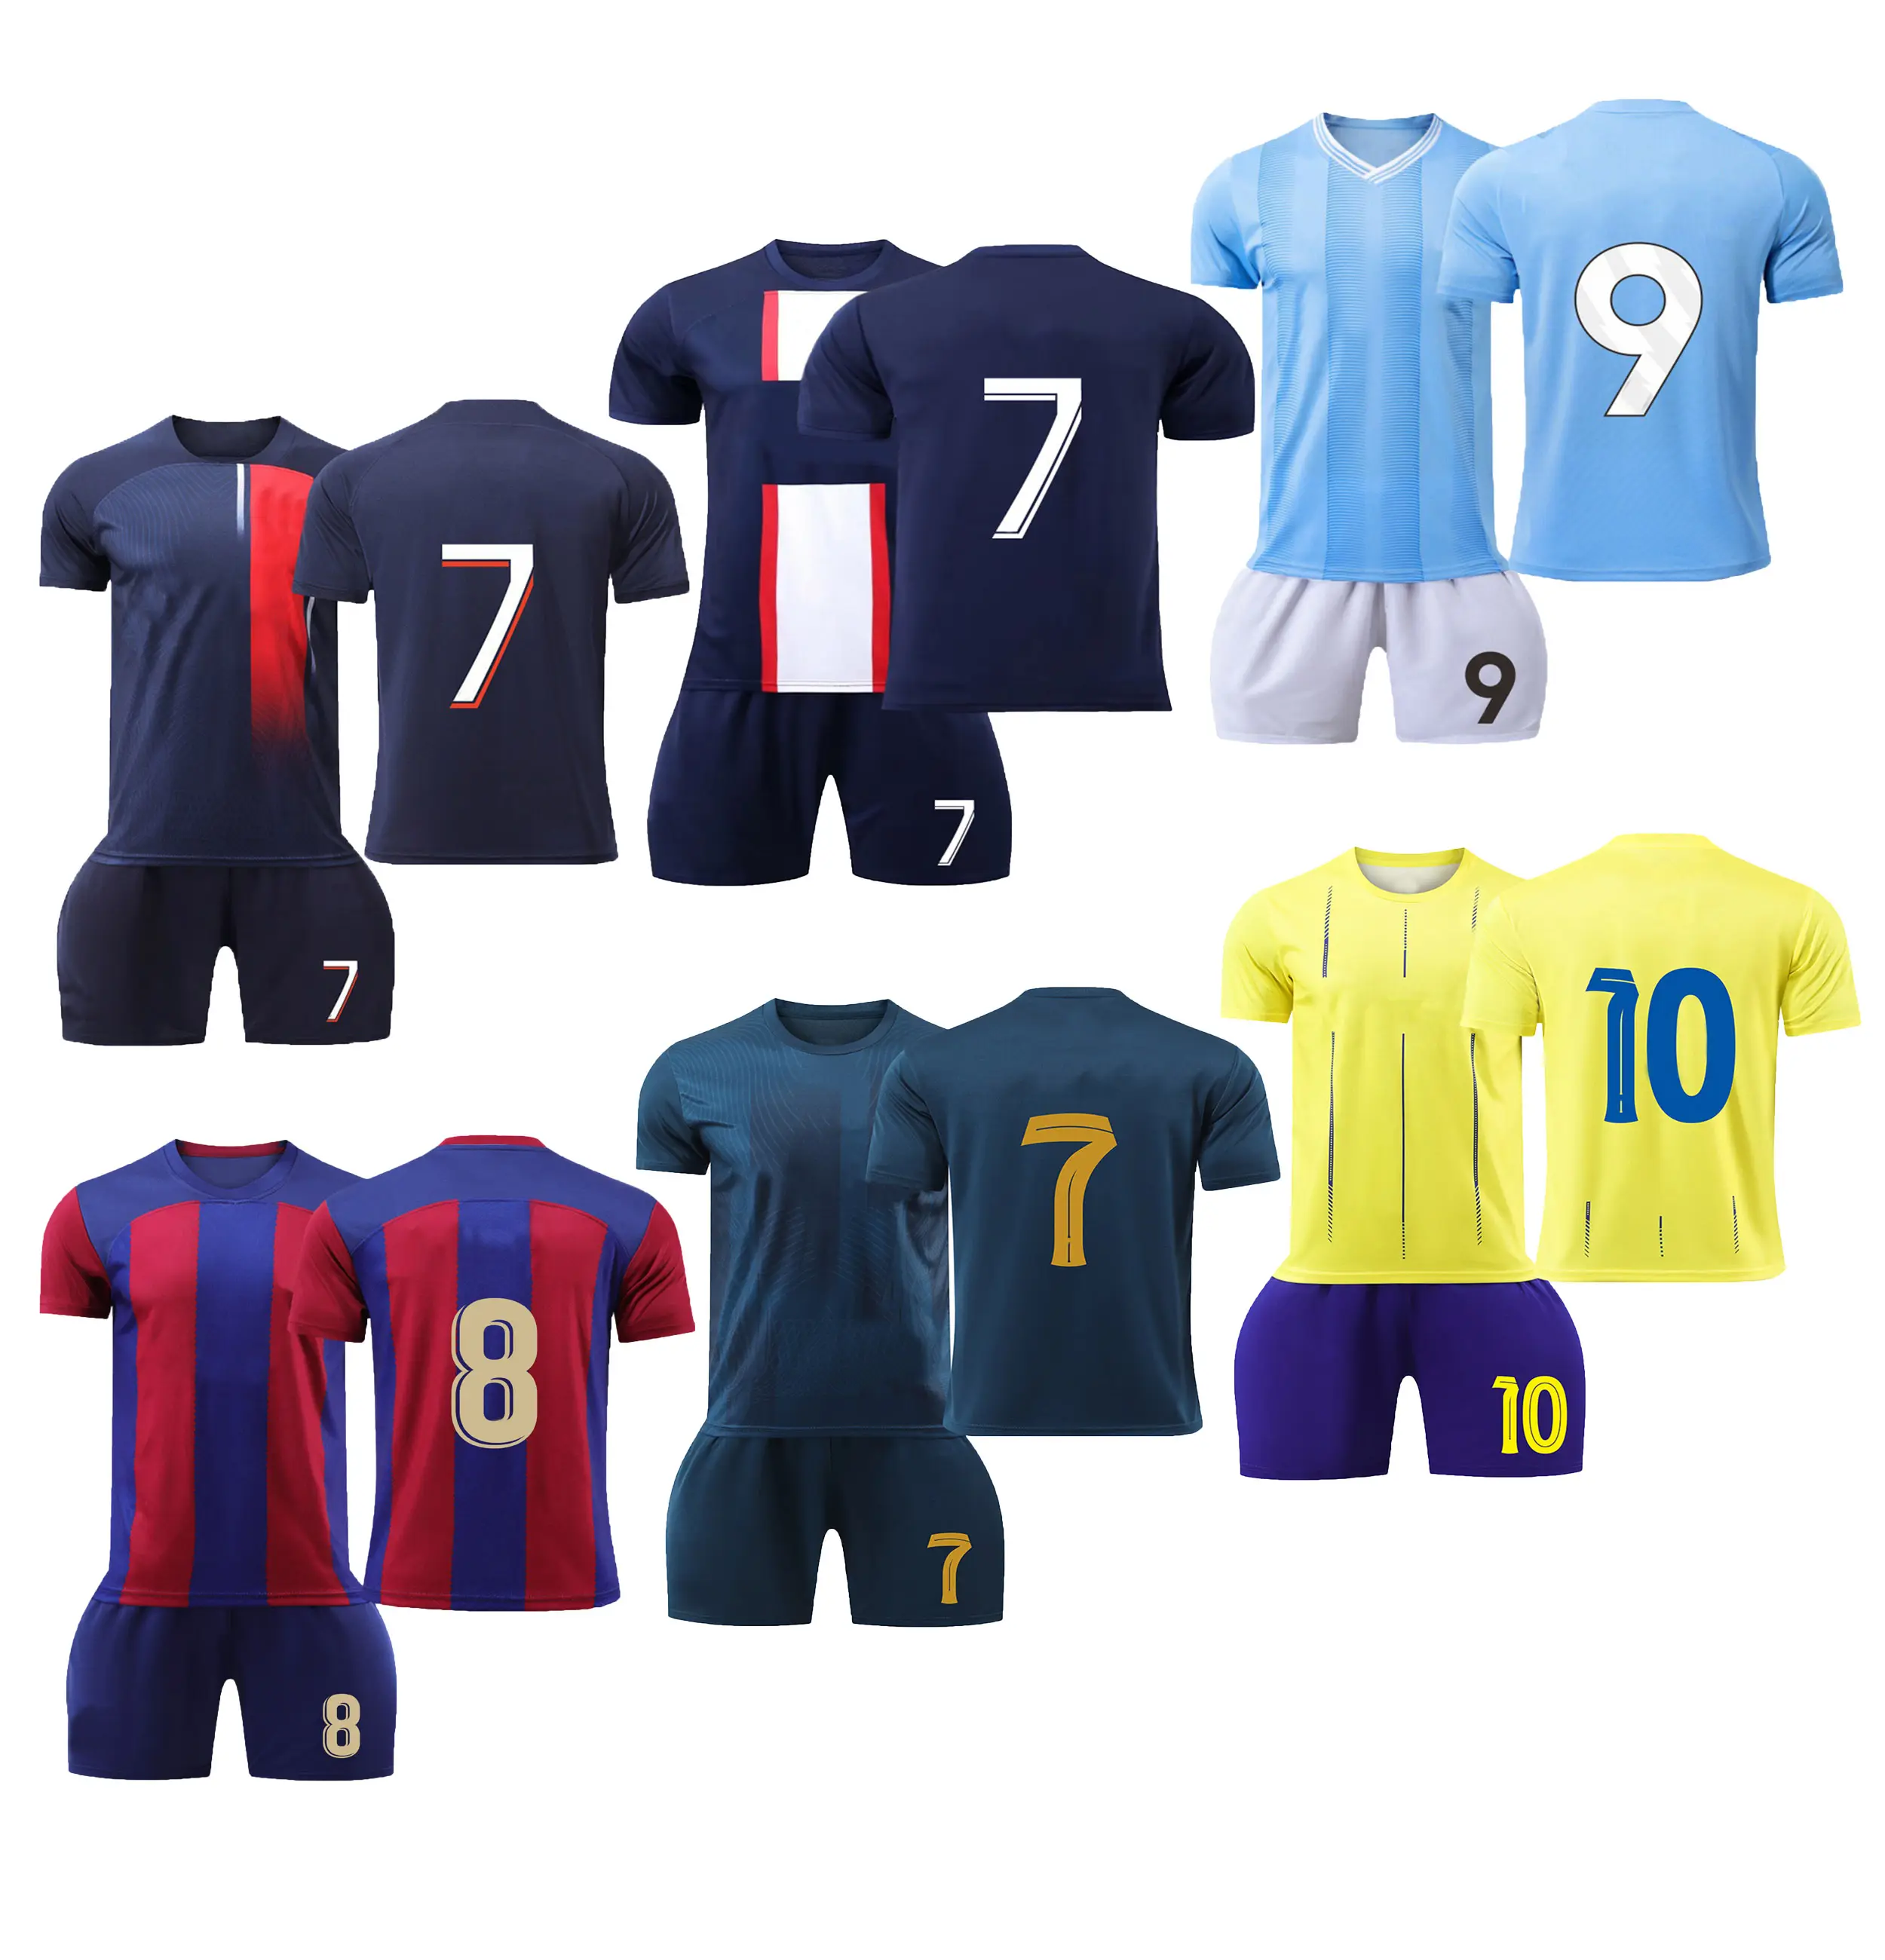 24-25 Wholesale Latest Football Men's and Women's Top Direct Sales Adult and Children's Football Suit Set